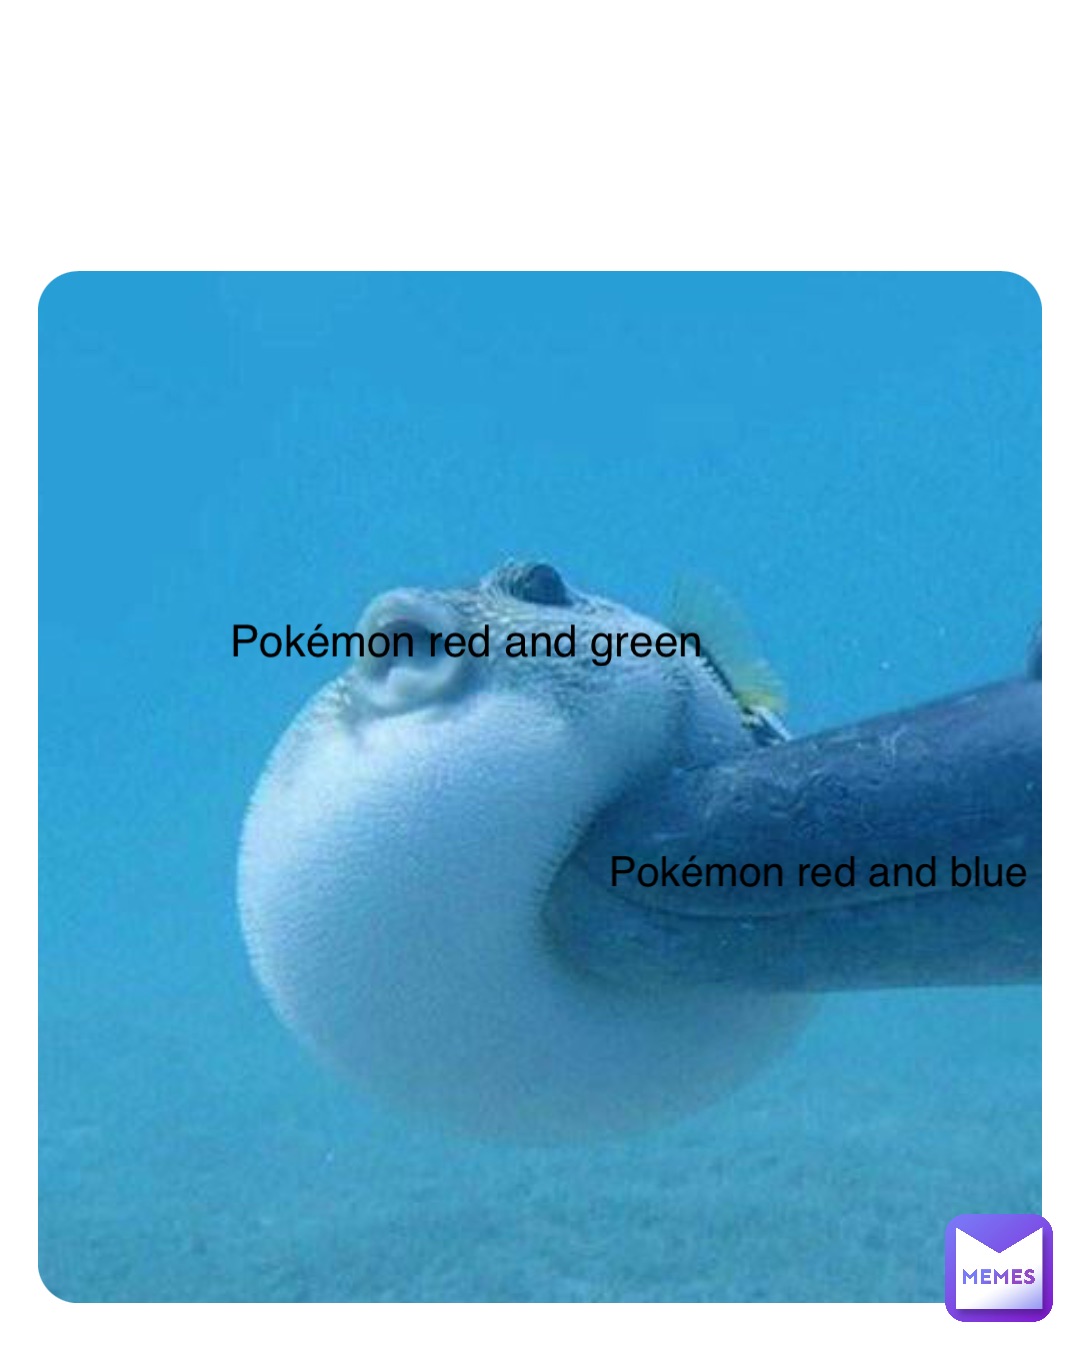 Pokémon red and green Pokémon red and blue